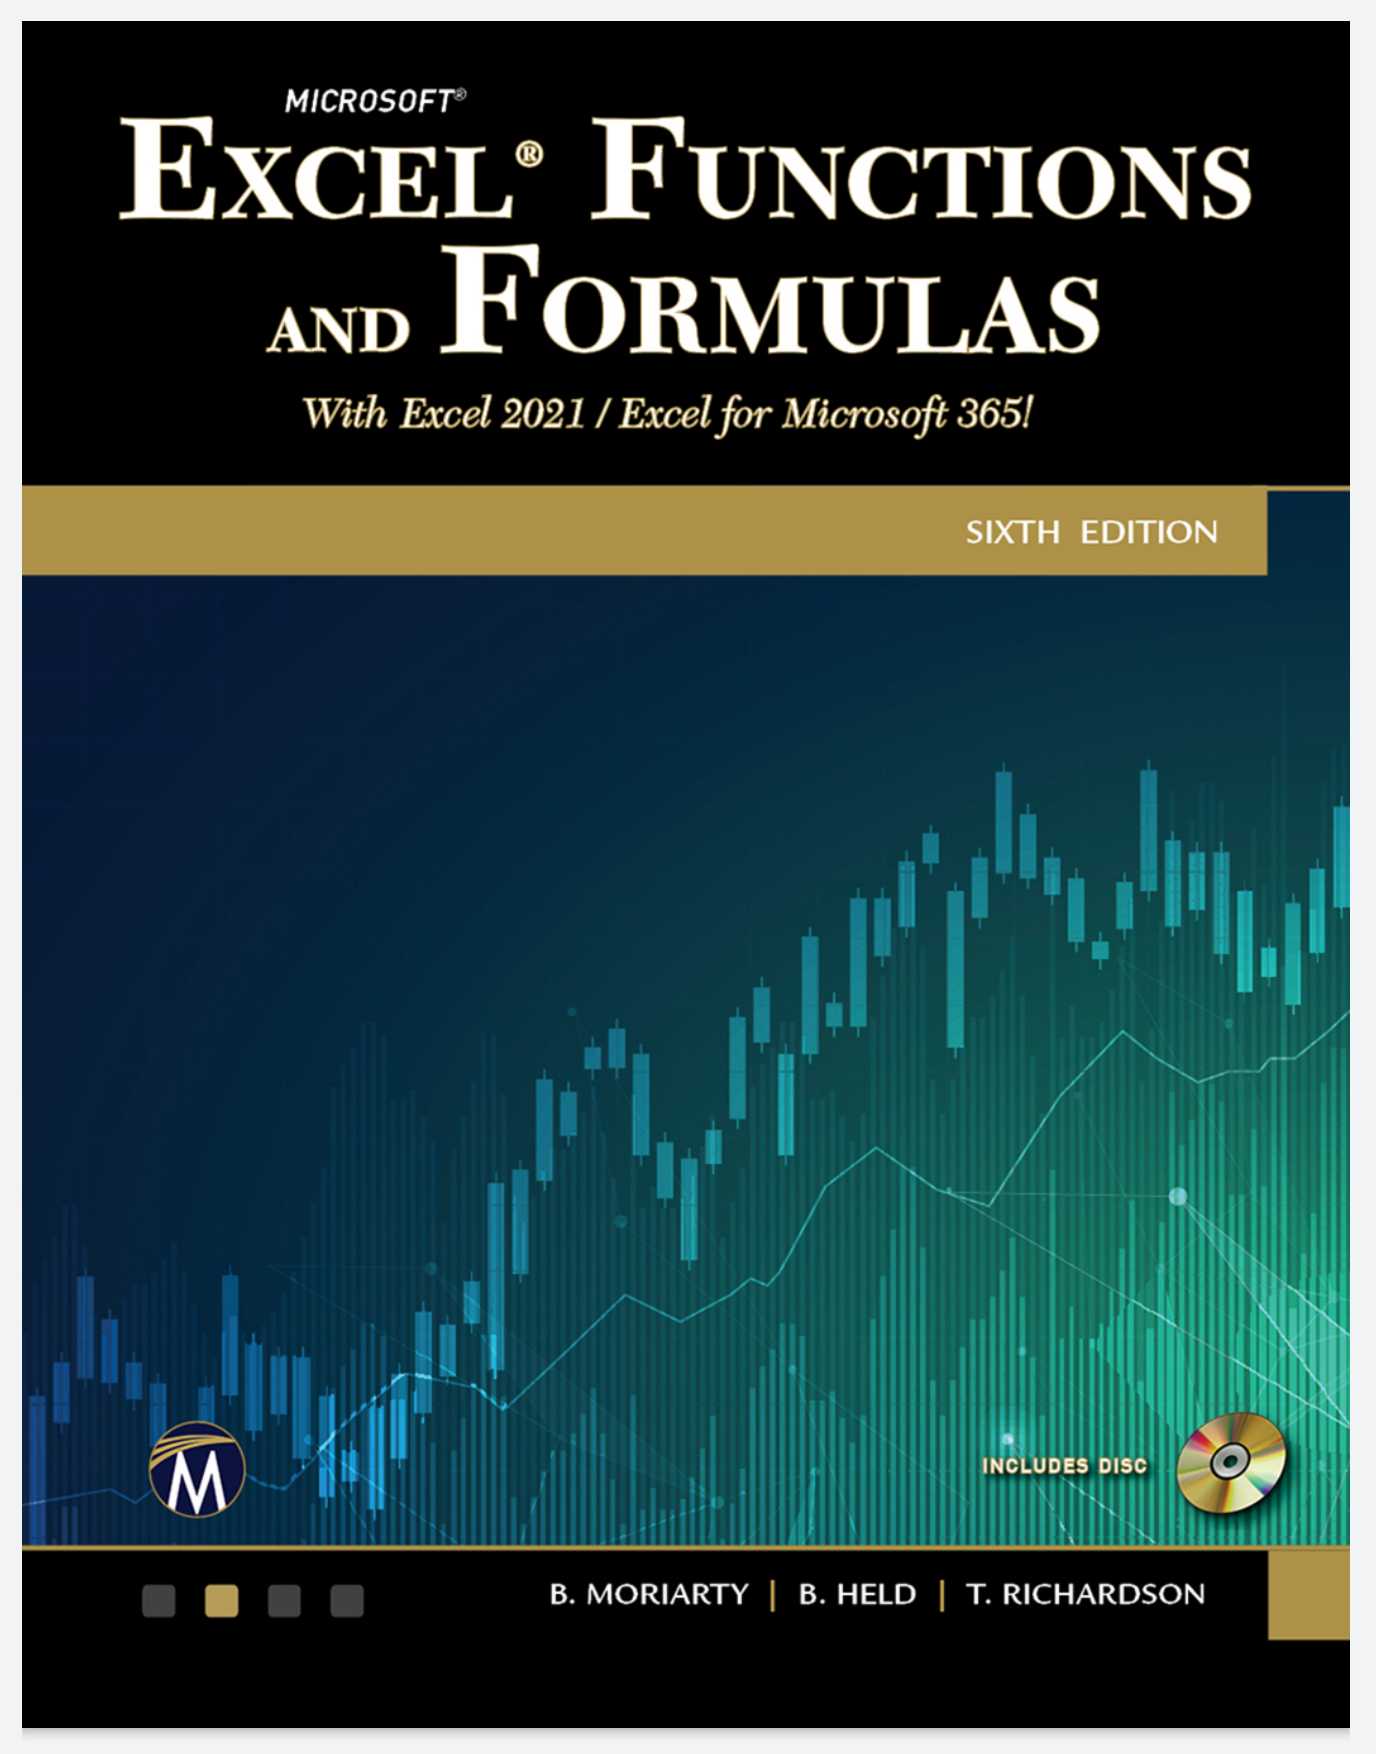 Microsoft Excel Functions and Formulas: With Excel 2021 / Microsoft 365 6th Edition PDF